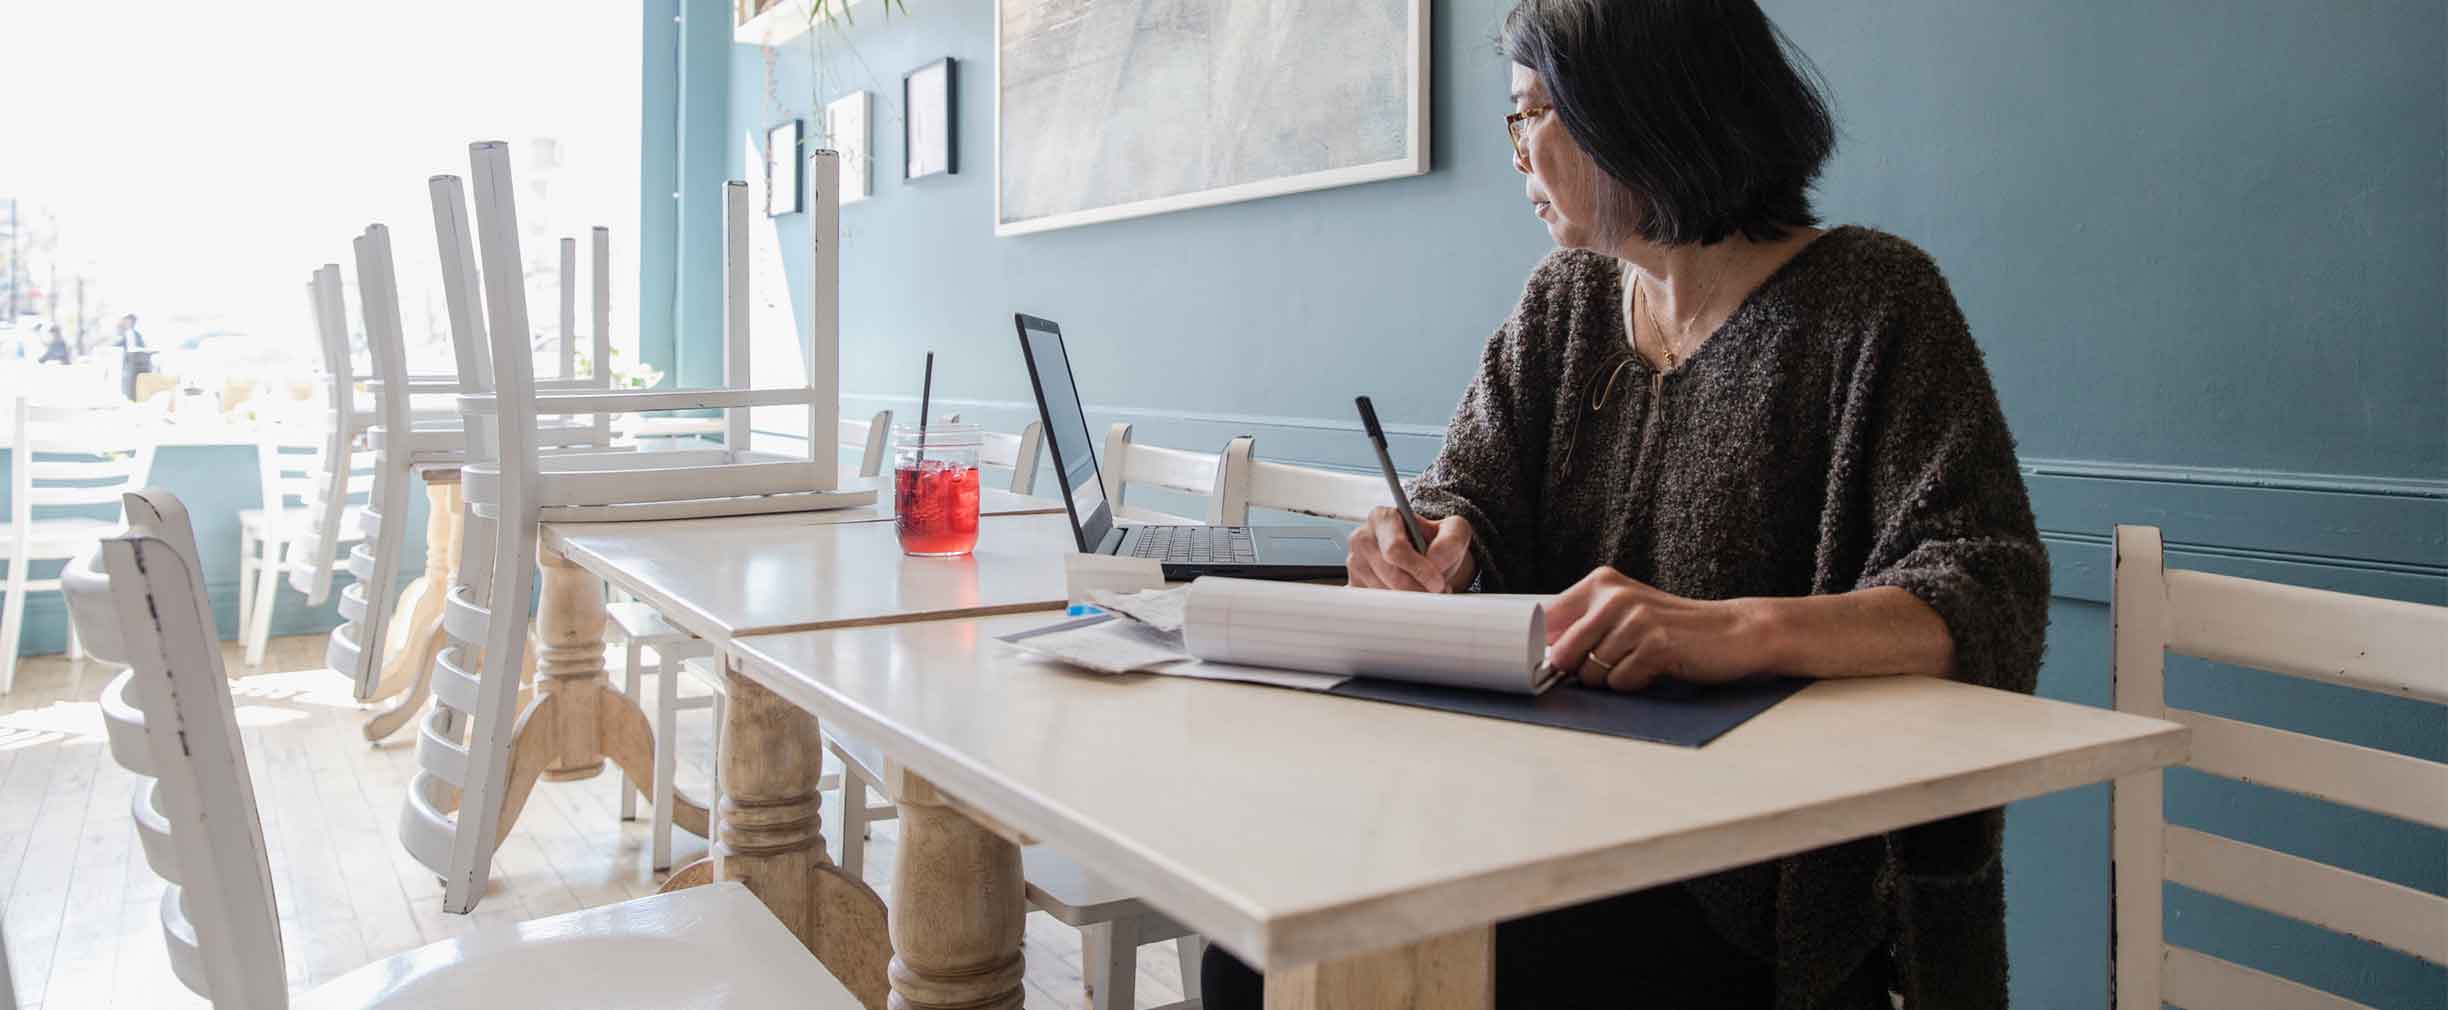 A woman business owner taking notes at a table.